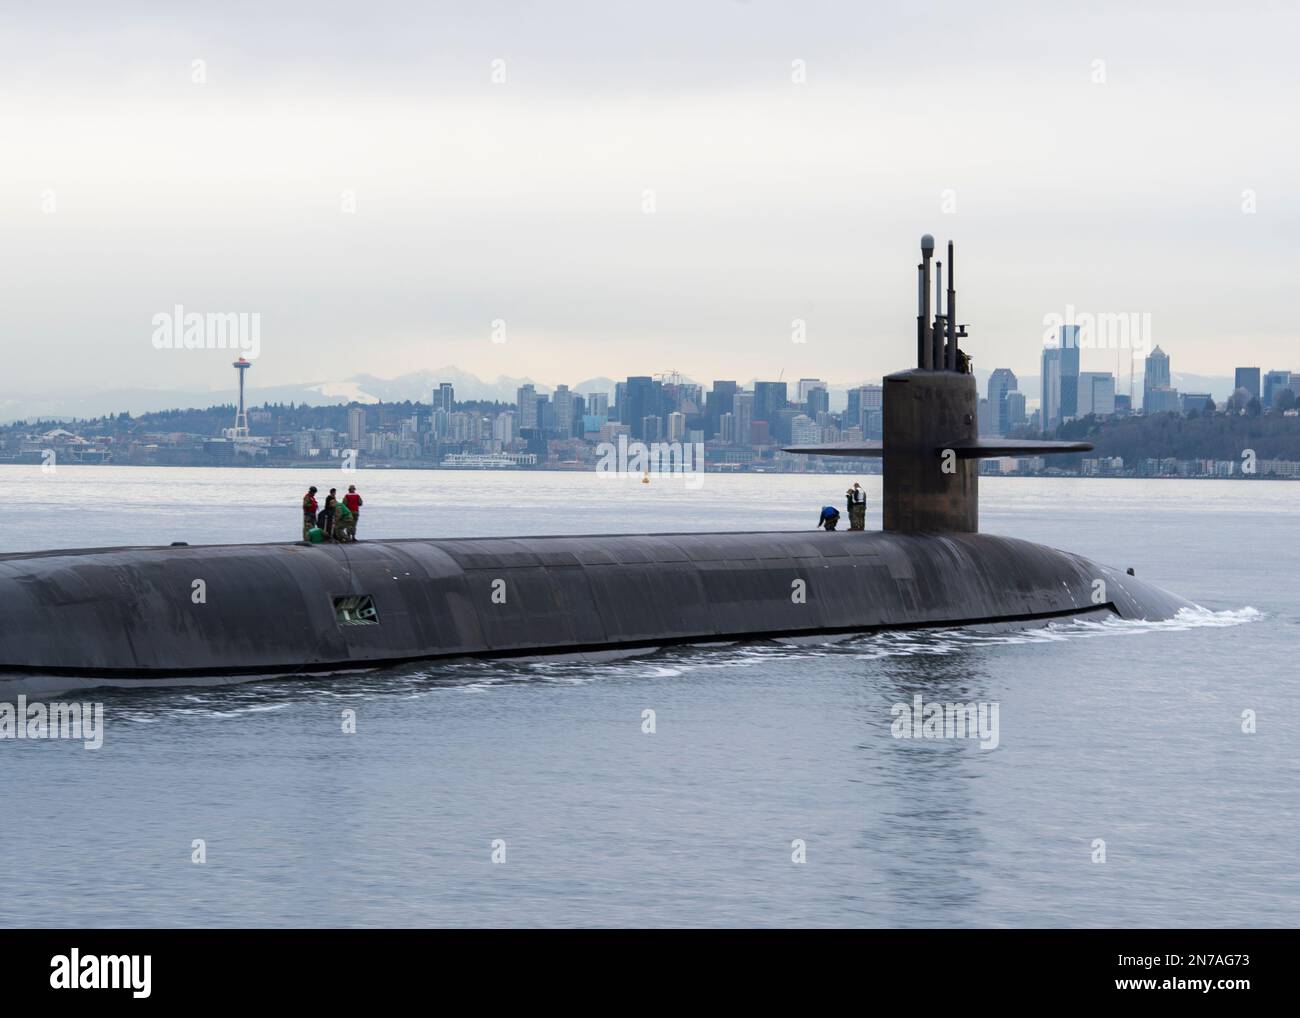 230209-N-ED185-1327  PUGET SOUND, Wash. (Feb. 9, 2023) The Ohio-class ballistic missile submarine USS Louisiana (SSBN 743) transits Puget Sound past the Seattle skyline following a 41-month engineered refueling overhaul at Puget Sound Naval Shipyard and Intermediate Maintenance Facility, February 9, 2023. Louisiana is one of eight ballistic-missile submarines stationed at Naval Base Kitsap-Bangor, providing the most survivable leg of the strategic deterrence triad for the United States. (U.S. Navy photo by Mass Communication Specialist 1st Class Brian G. Reynolds) Stock Photo